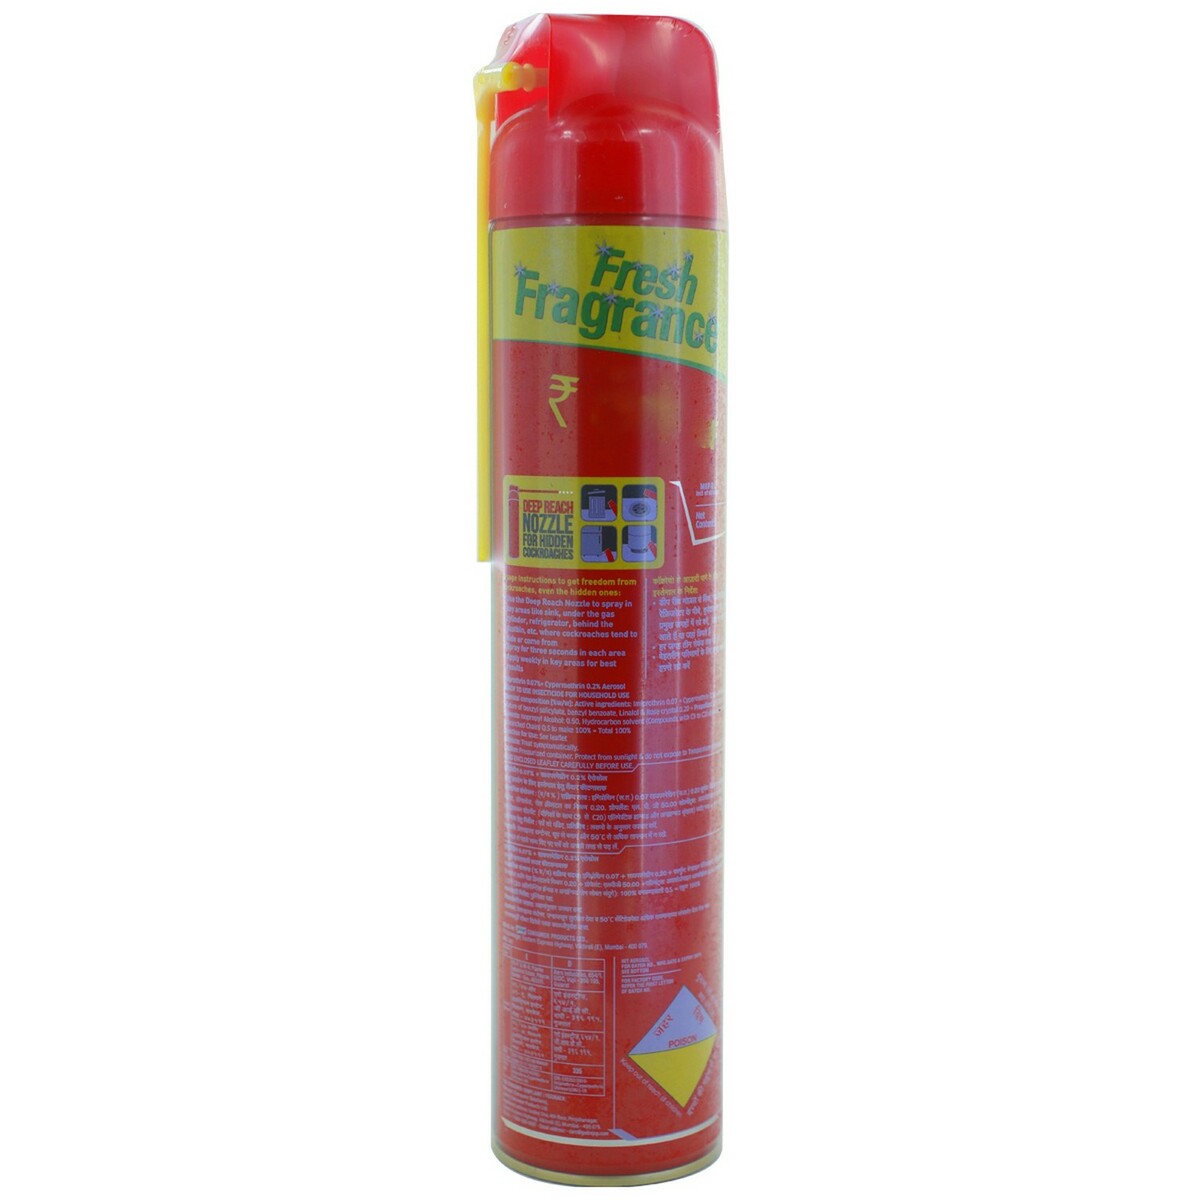 Hit Crawling Insect Killer 625ml